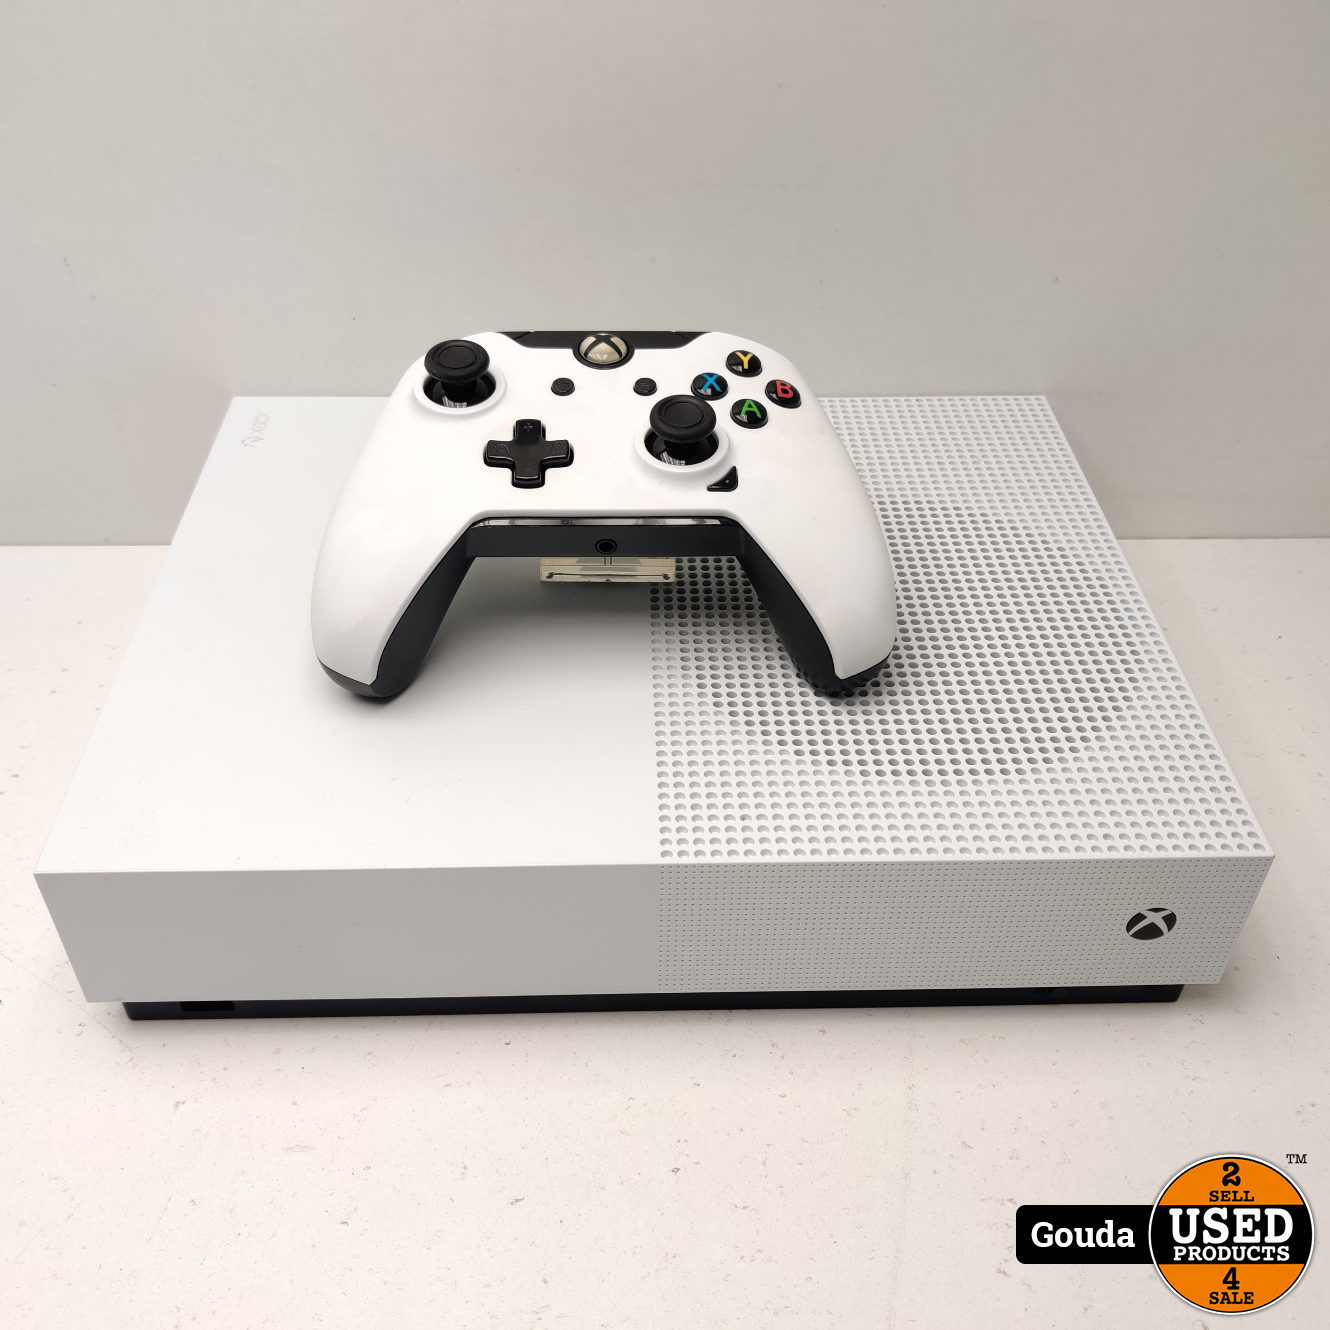 gans porselein Canberra xbox one 500gb met controller - Used Products Gouda